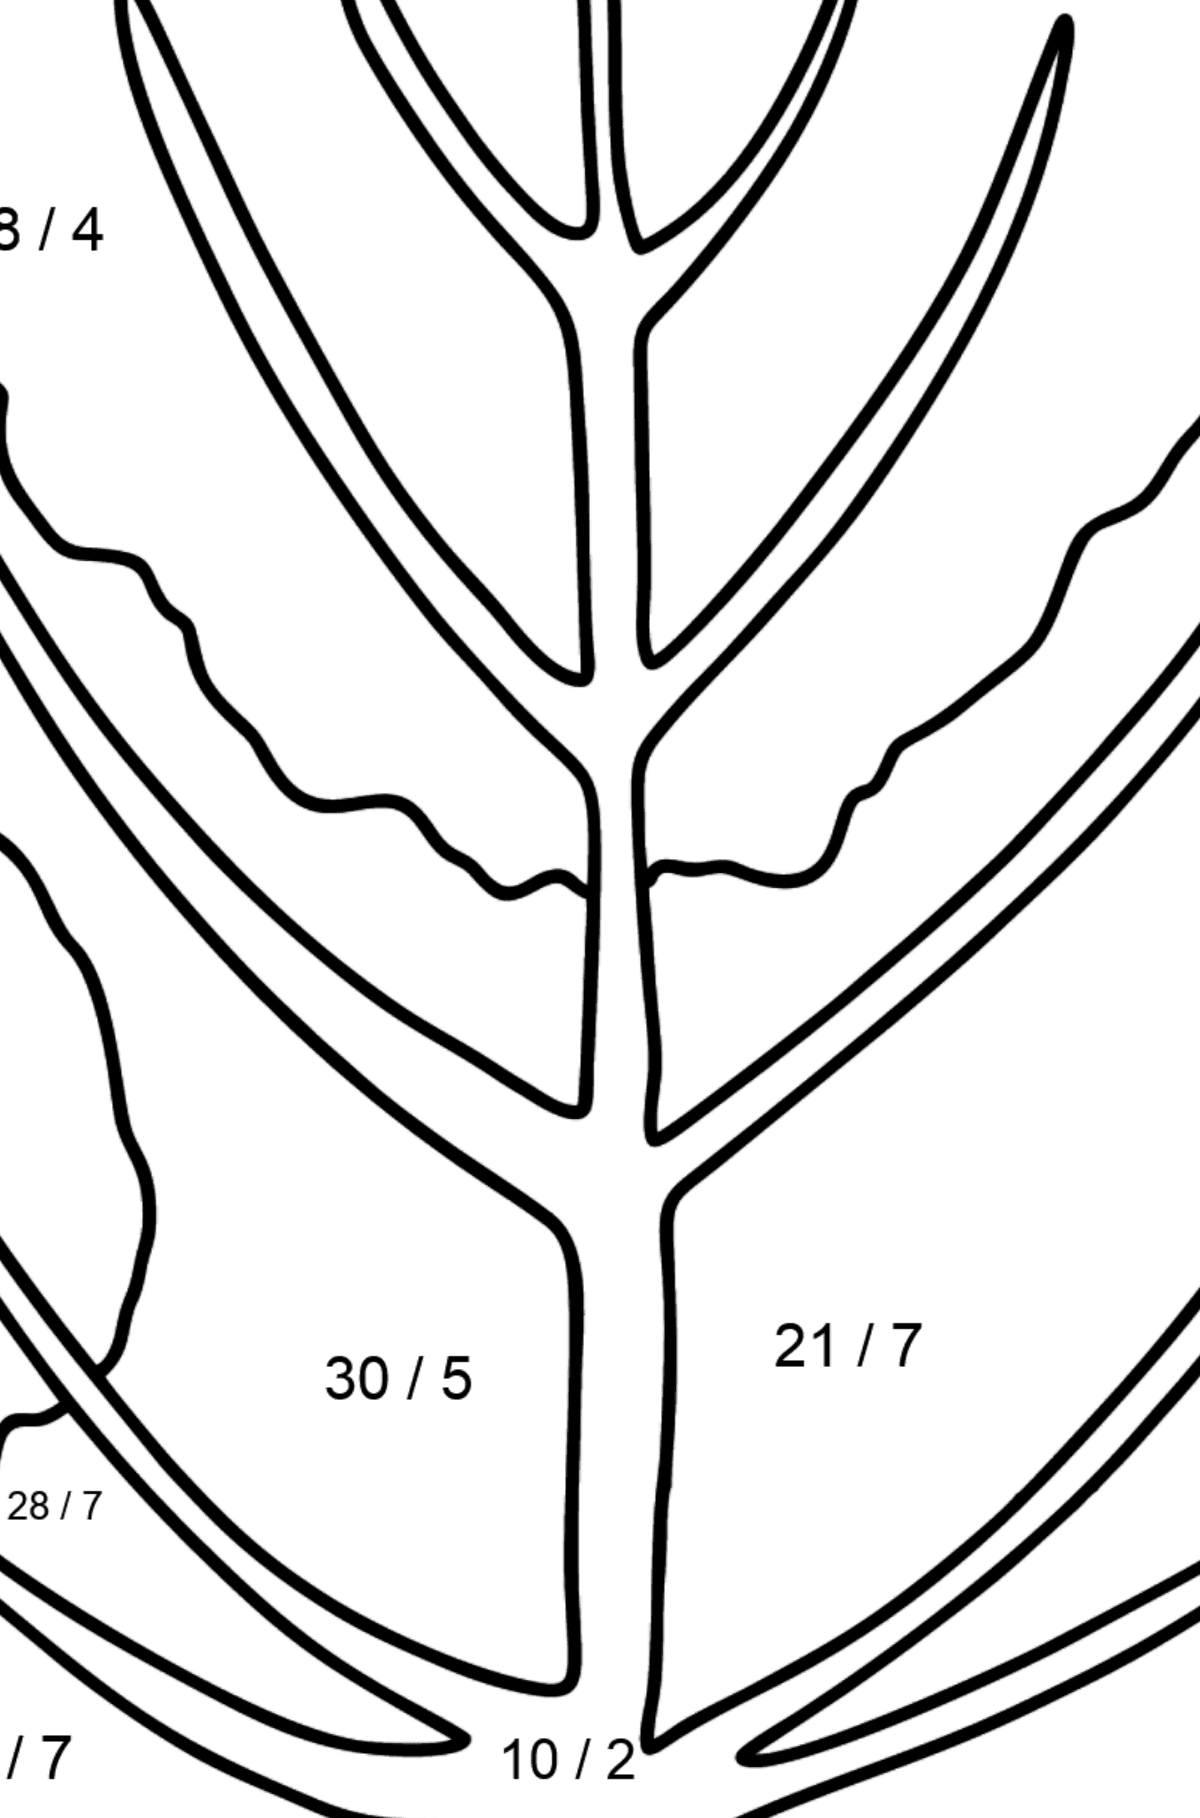 Aspen Leaf coloring page - Math Coloring - Division for Kids